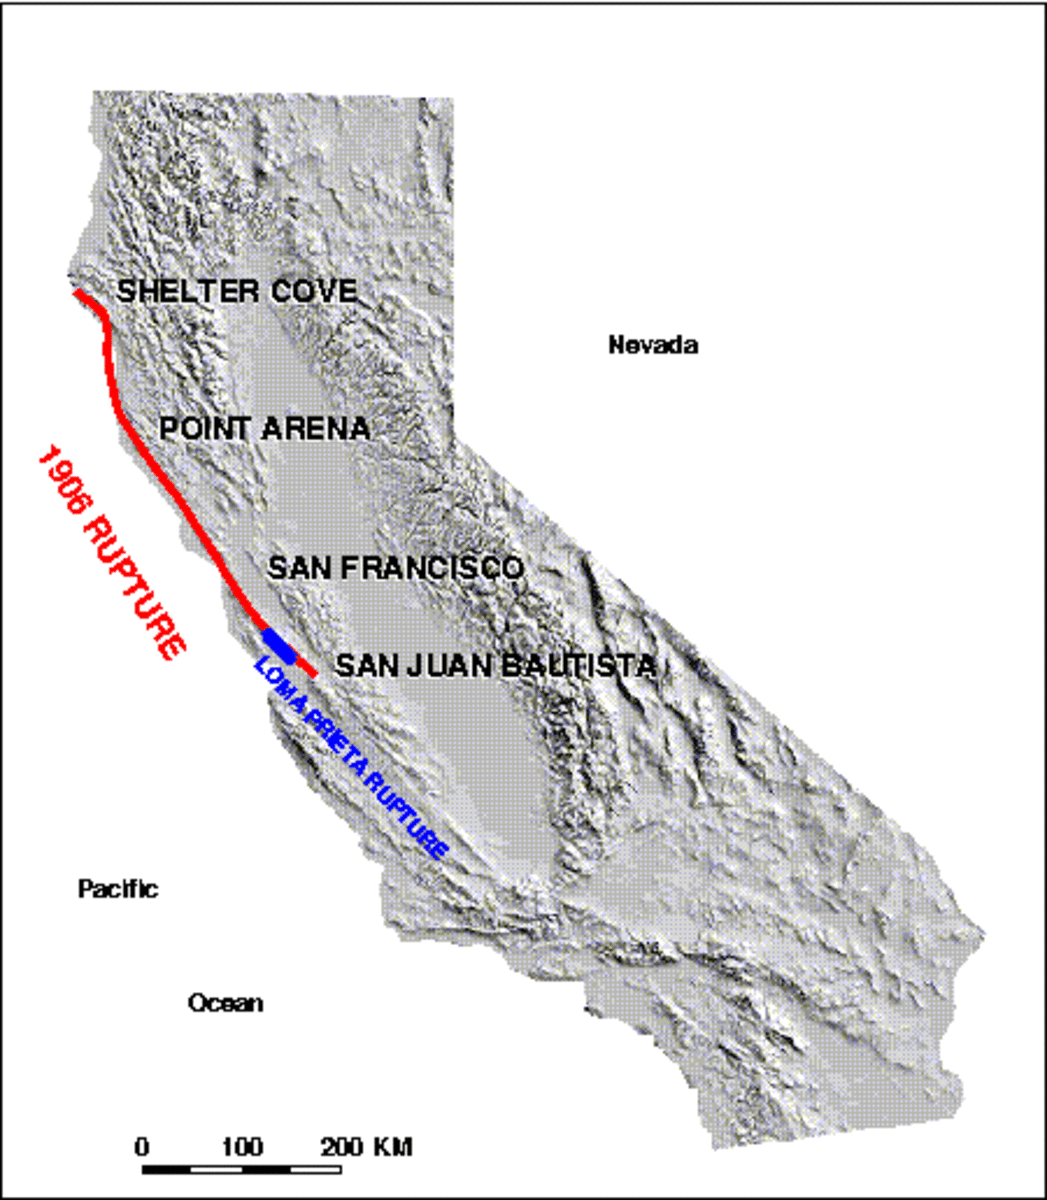 USGS image. (Don't confuse the wording in blue with the illustrative line of the fault.) The actual 1989 rupture, in blue, is overlaid on the red line for the 1906 quake, and it is very tiny.